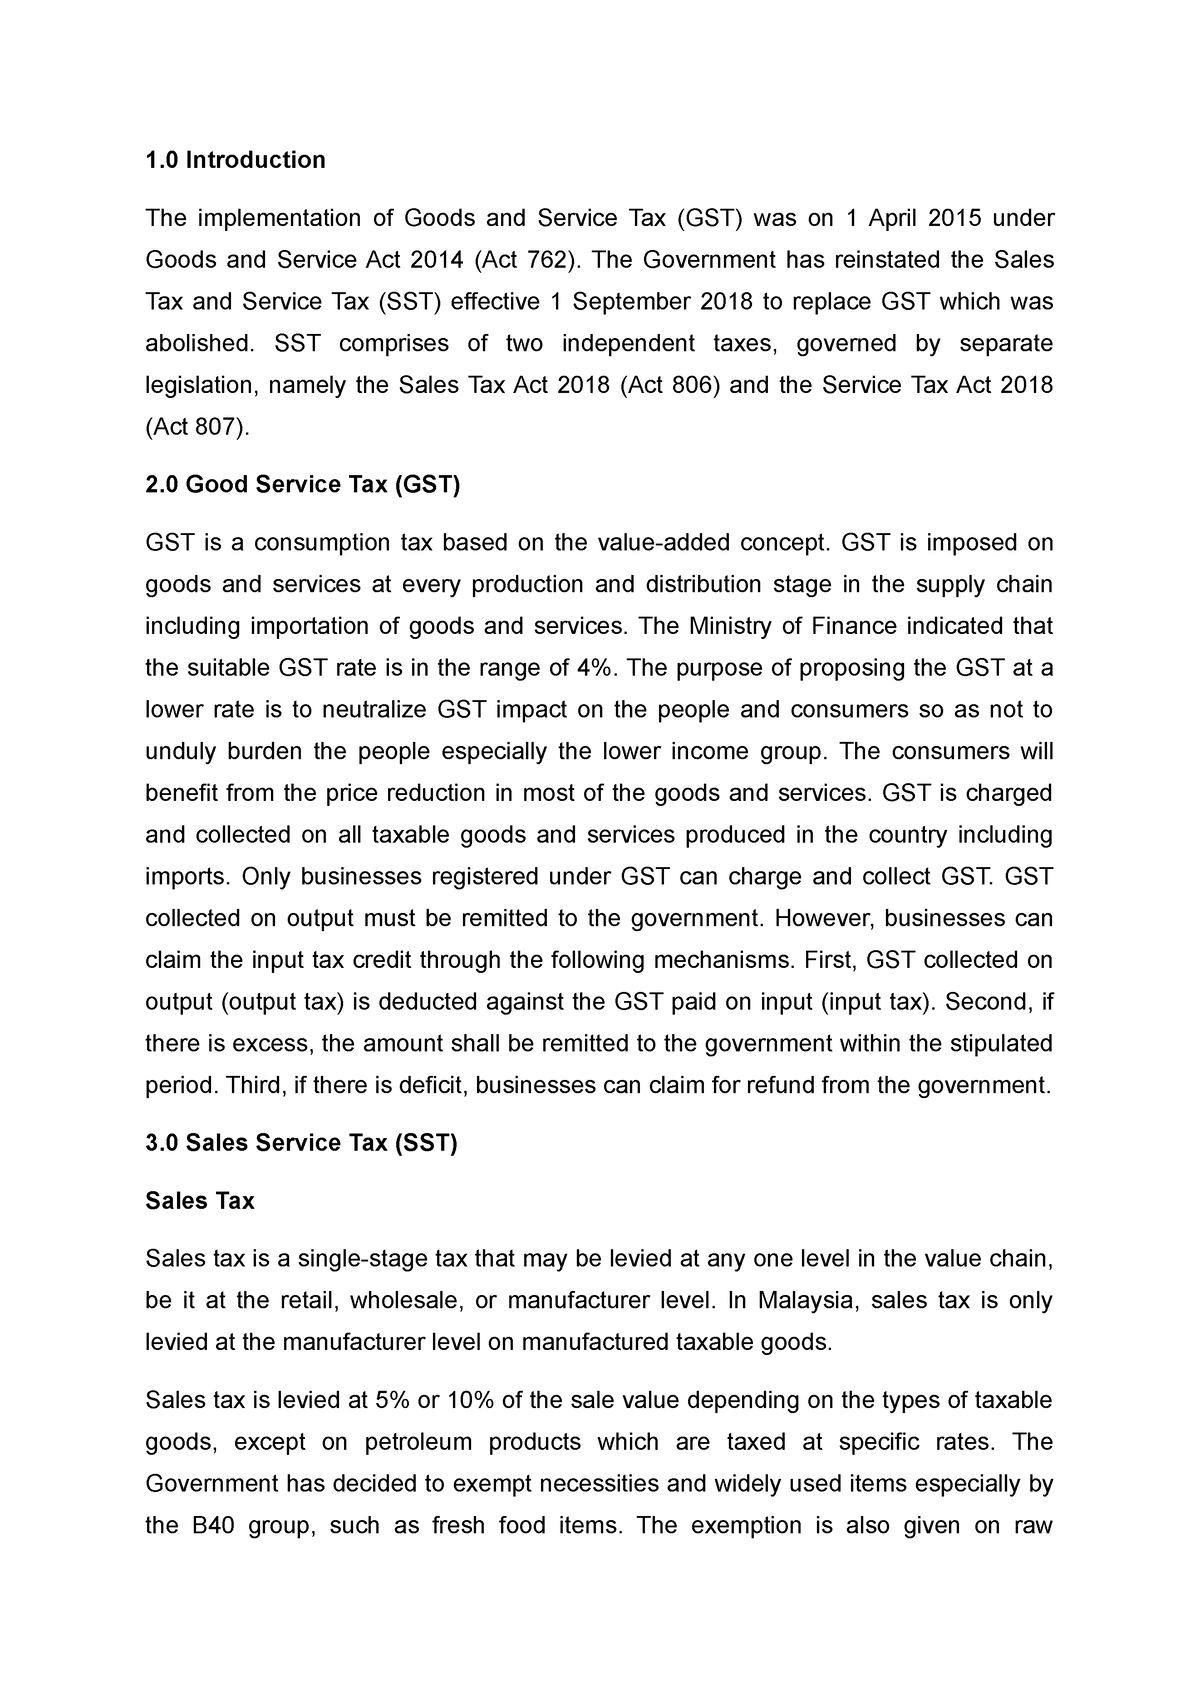 essay on goods and services tax